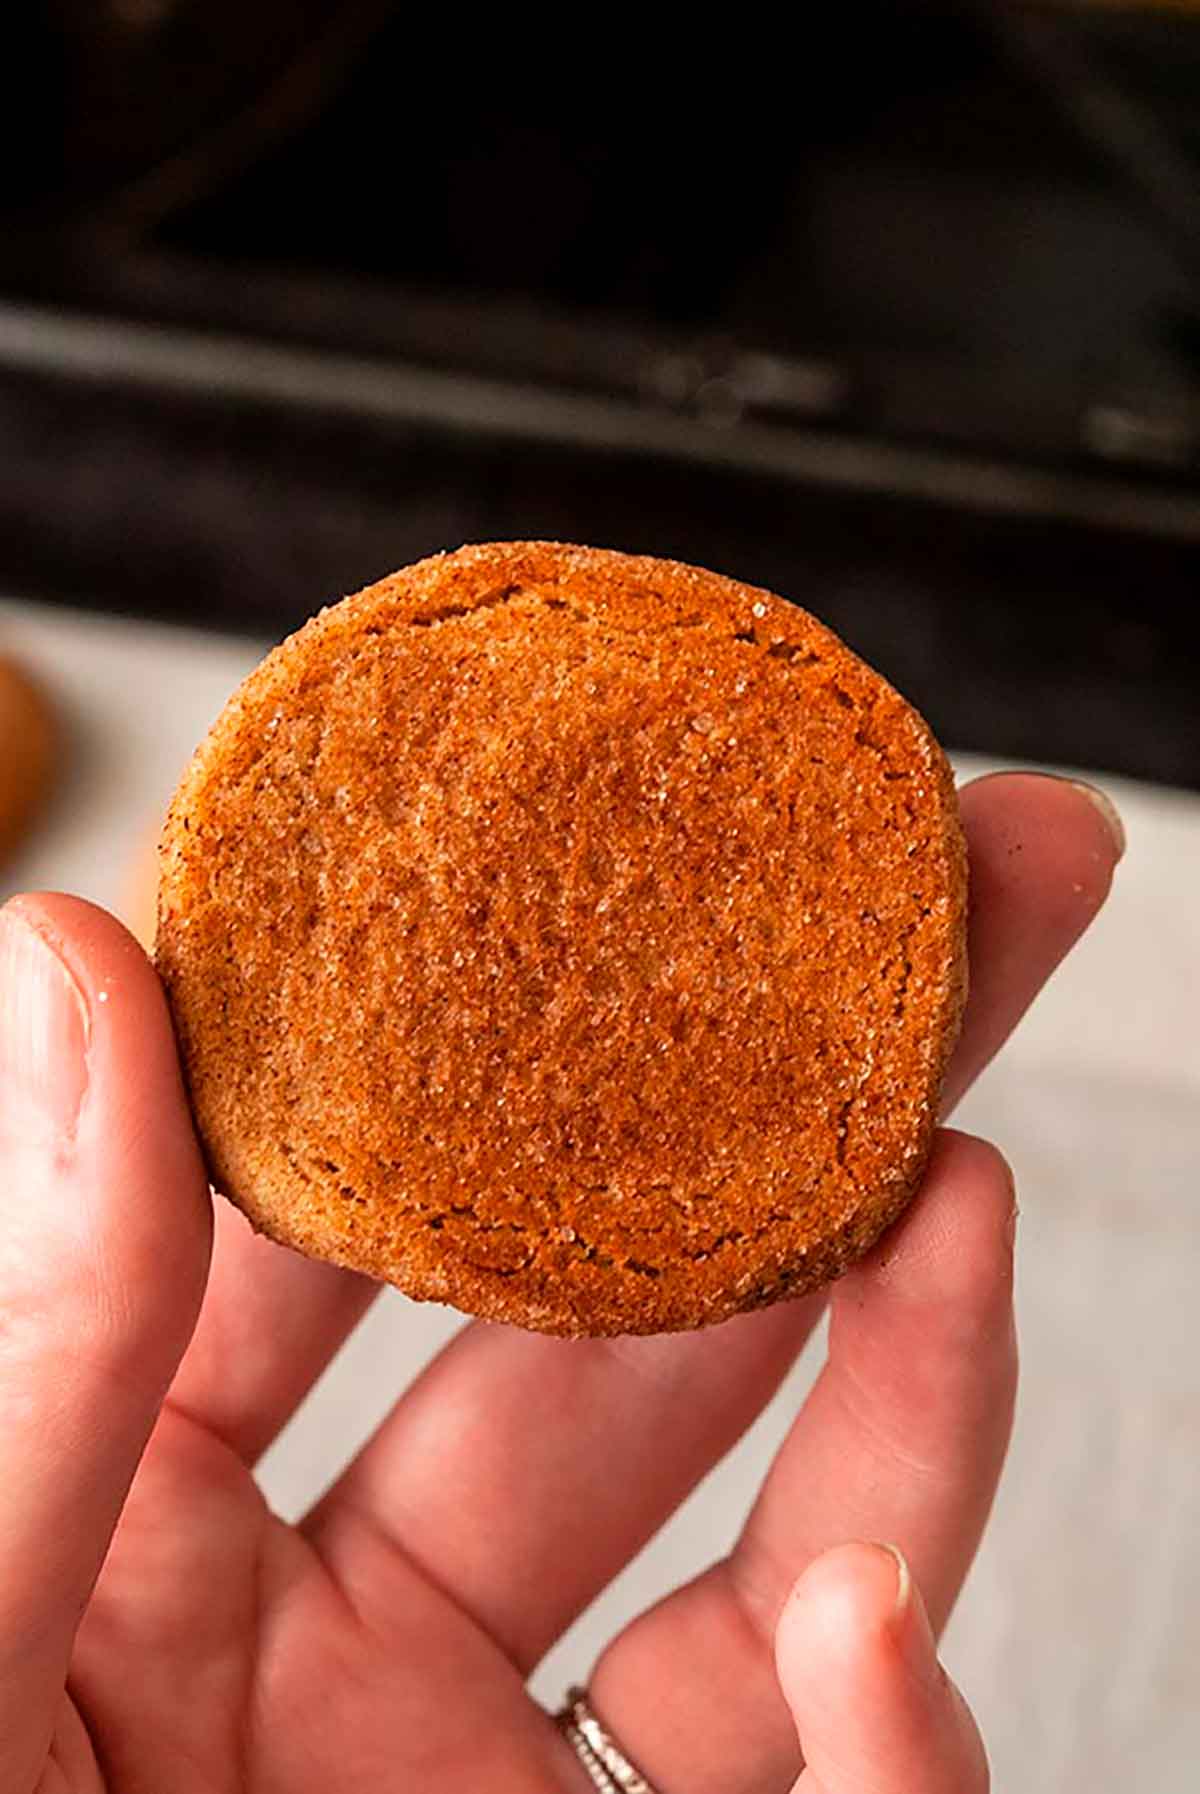 Fingers holding a snickerdoodle showing the brown bottom above a baking pan.